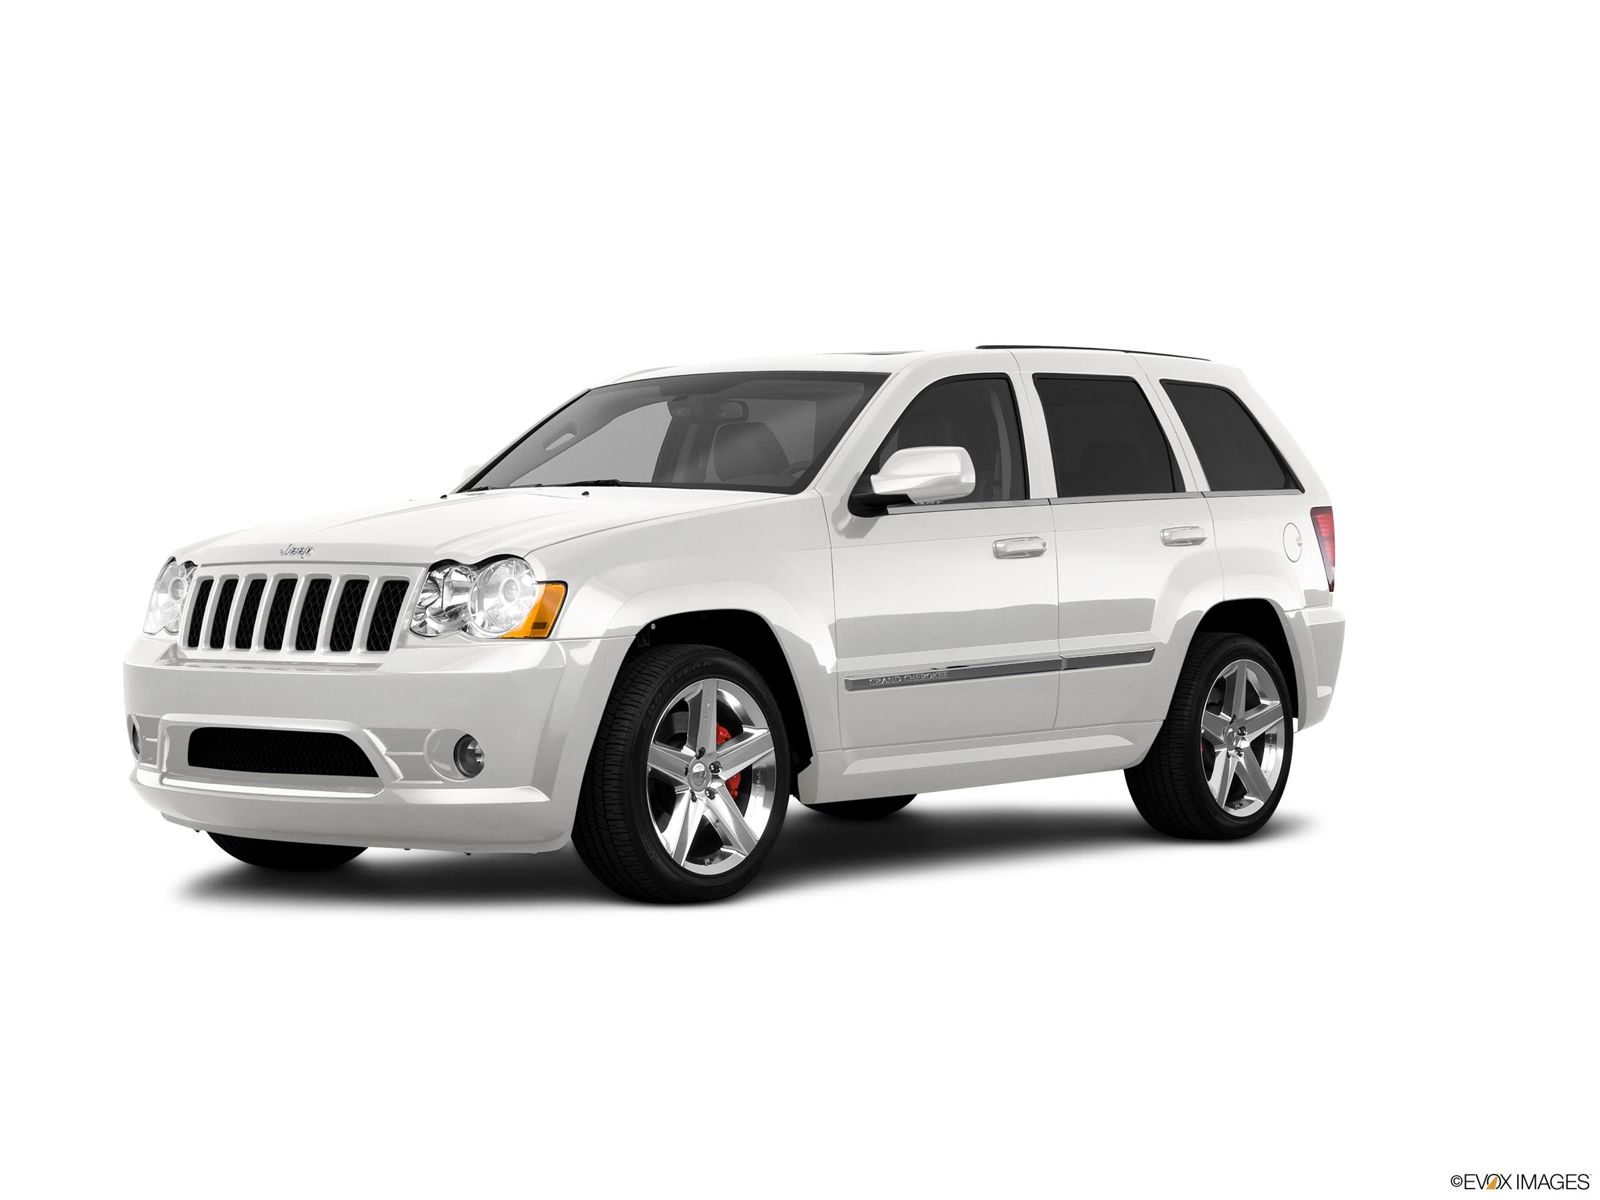 2010 Jeep Grand Cherokee Research, Photos, Specs and Expertise | CarMax